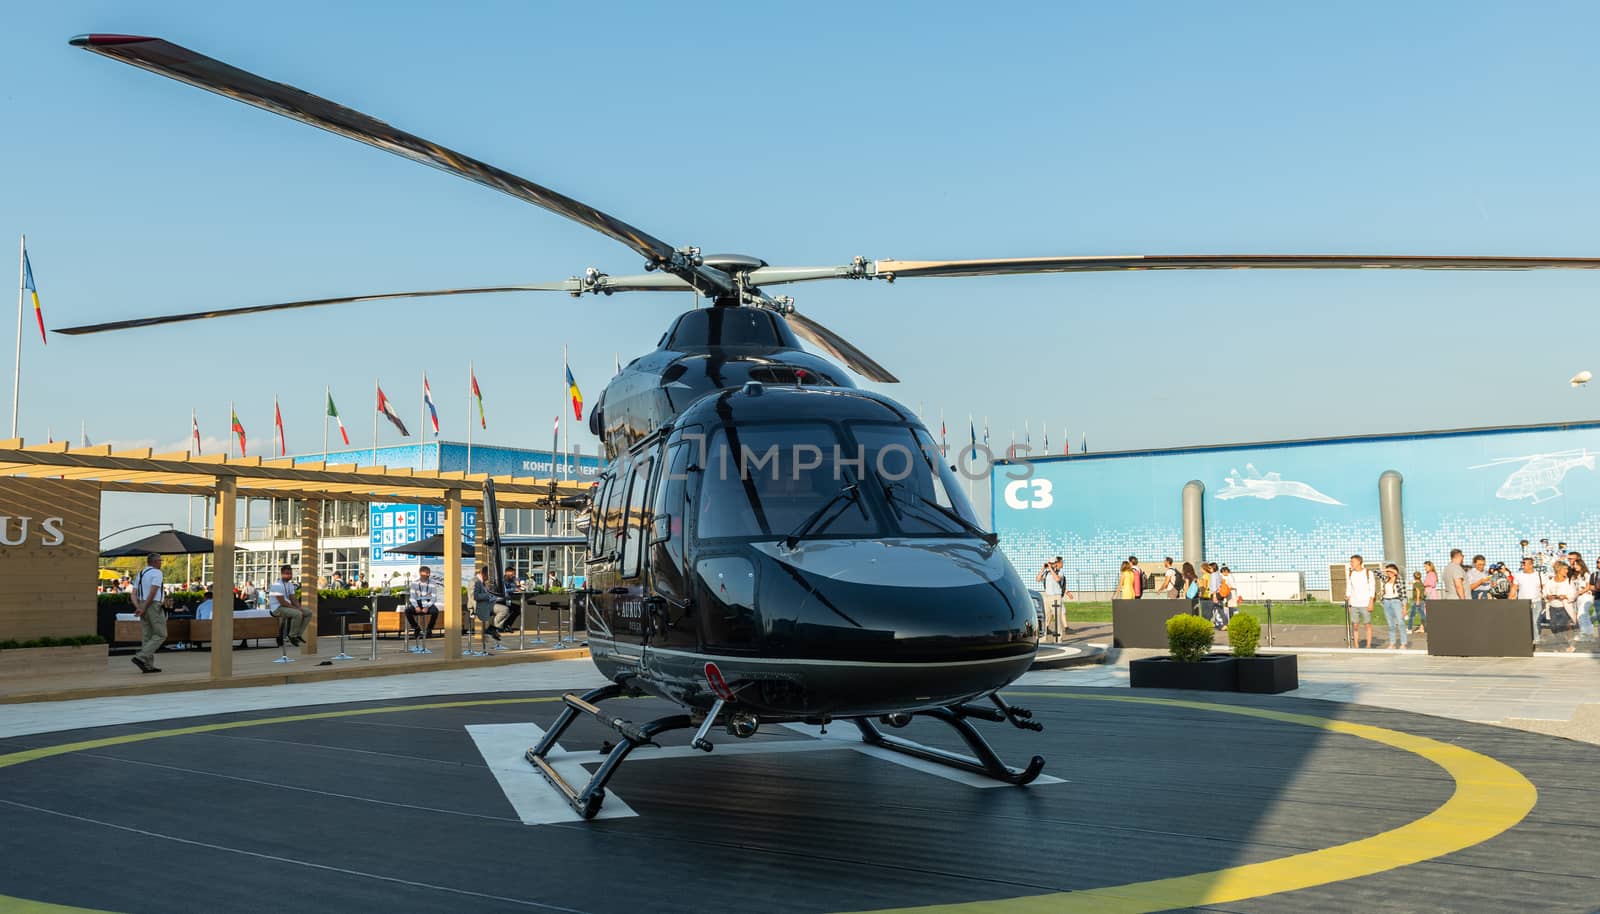 August 30, 2019 Zhukovsky, Russia. The Ansat helicopter in the Aurus design at the MAKS-2019 International aviation and space salon.